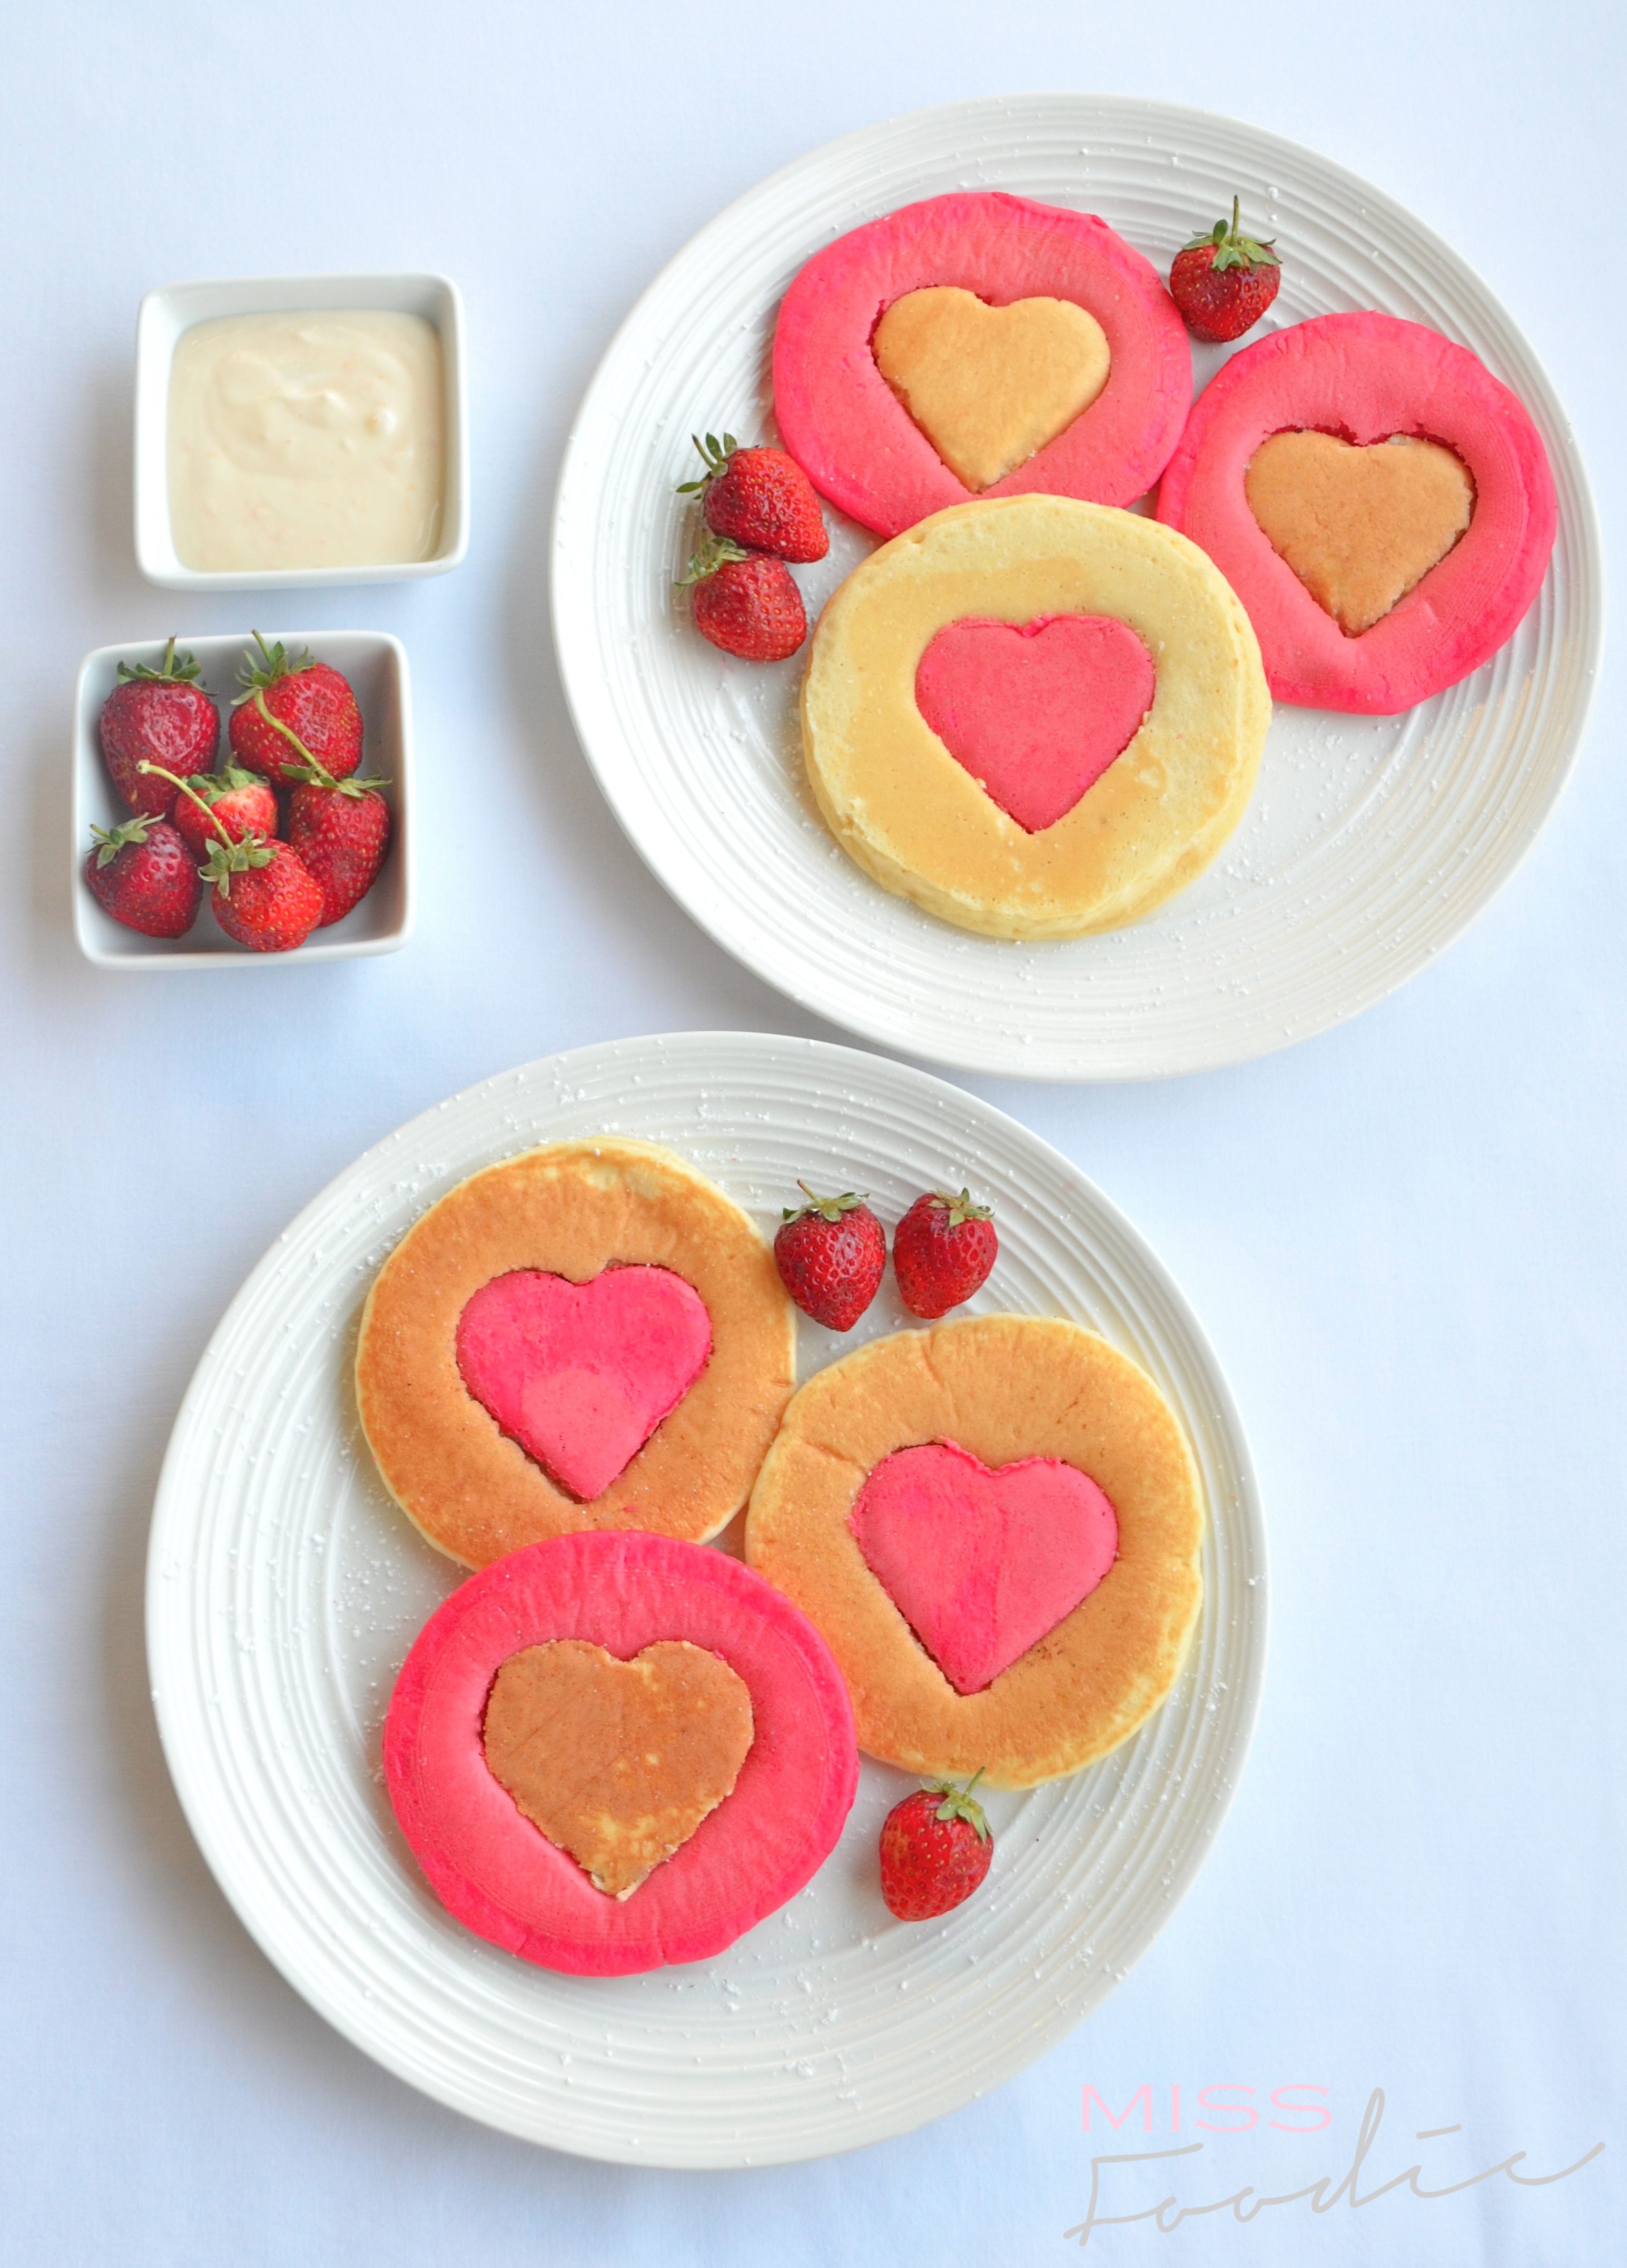 Heart Shaped Food - Valentines Day - Miss Foodie_21_1